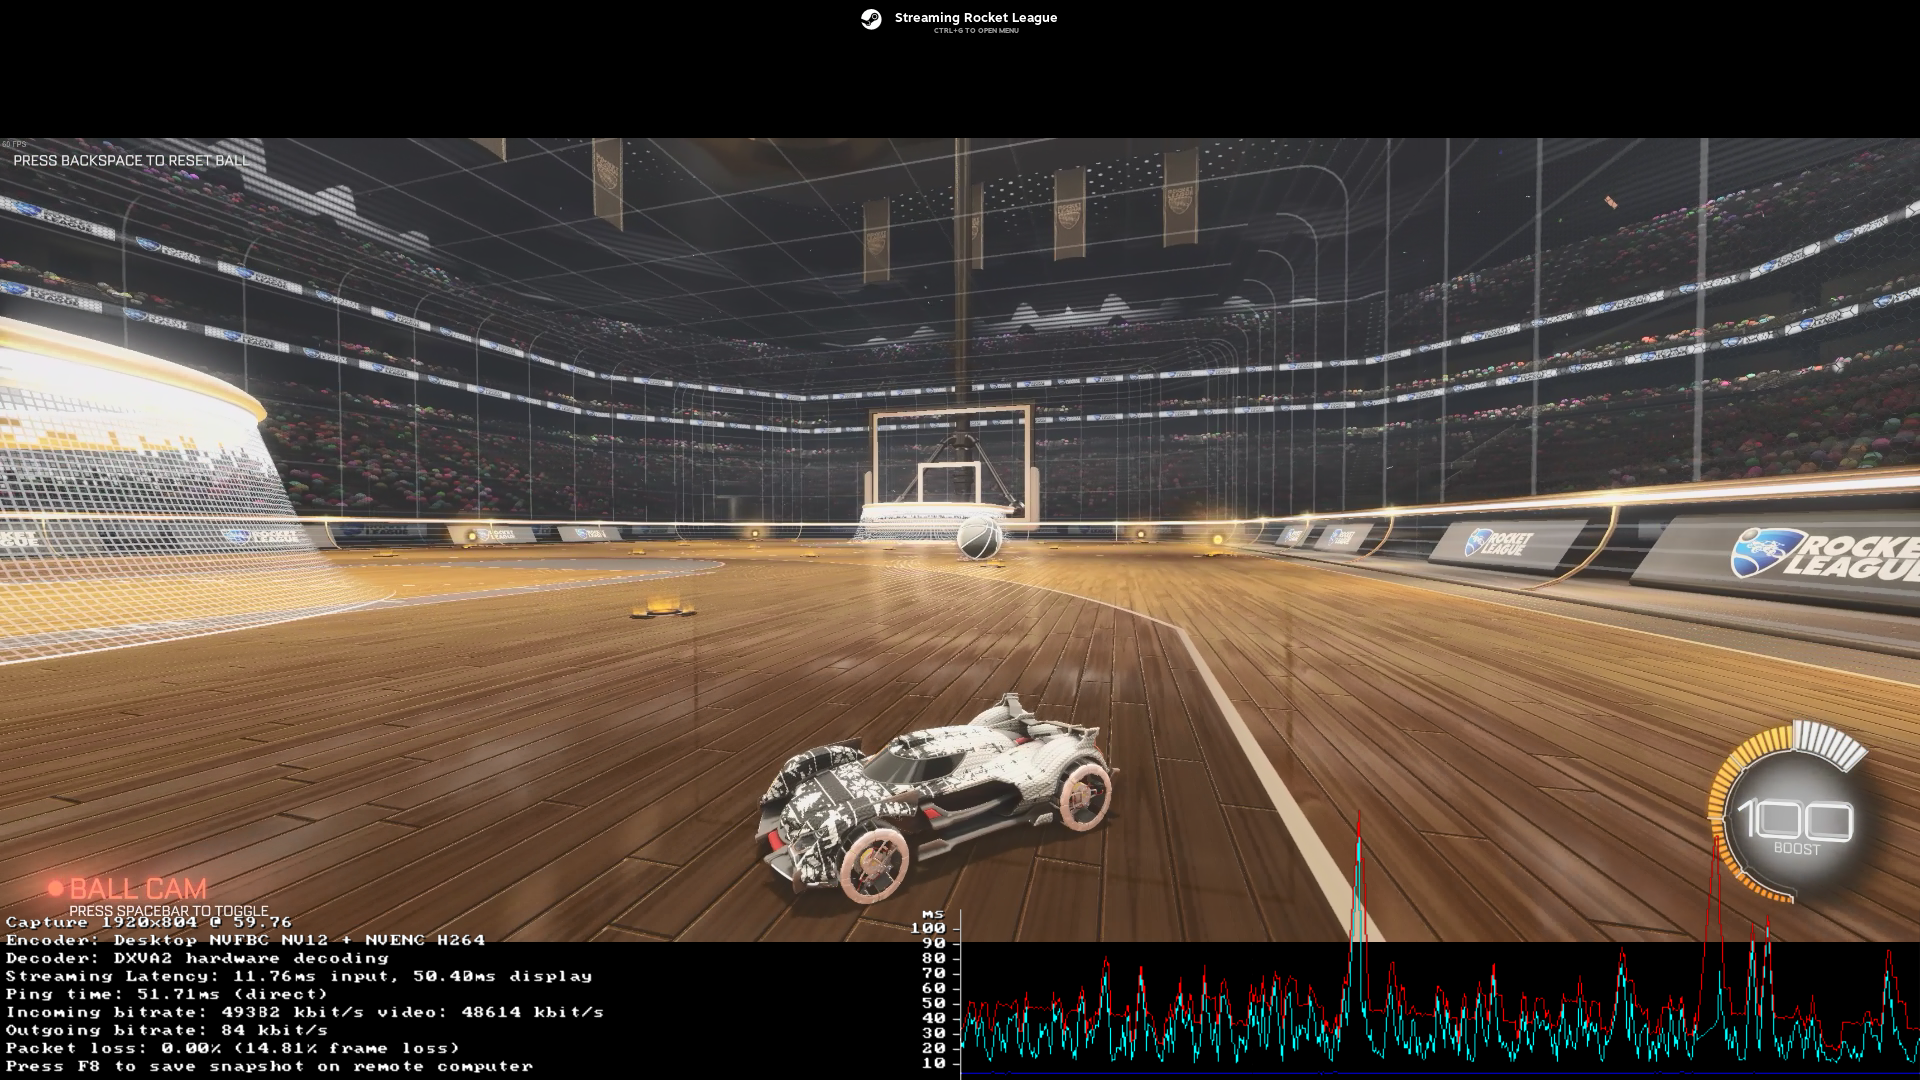 Steam Remote Play performance graph test in Rocket League